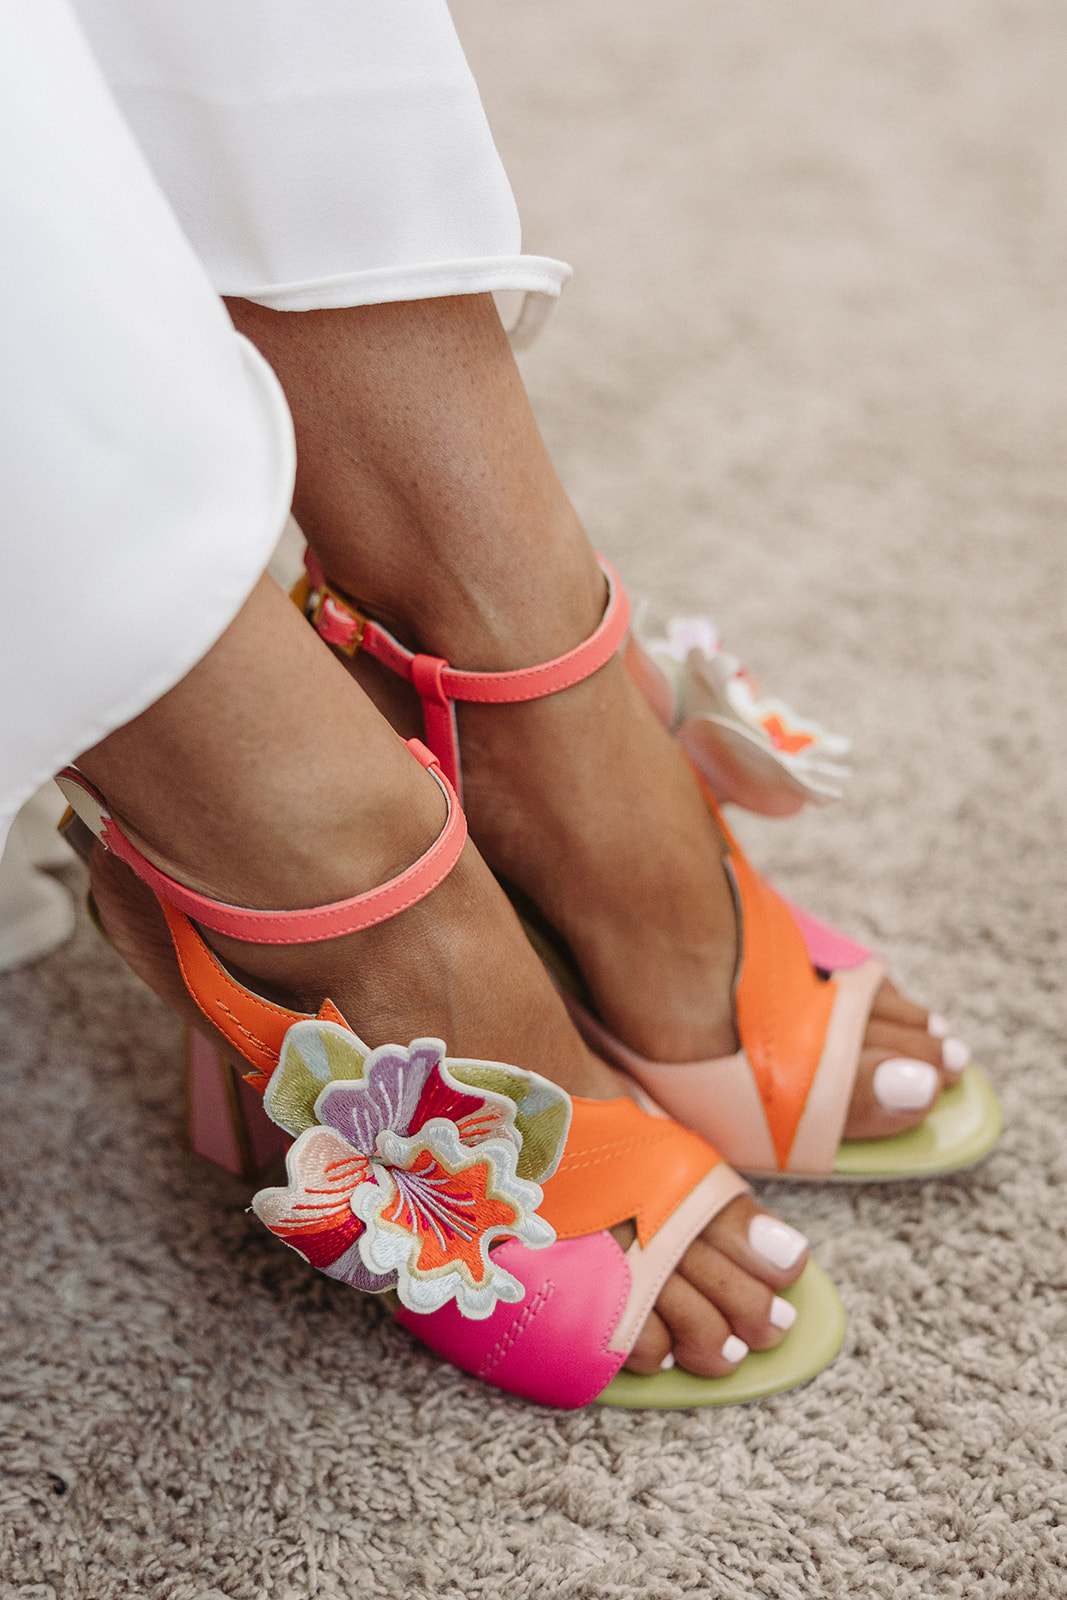 A closeup look at the bright orange and pink floral sandals of the bride. Her white toes peek out of the front.